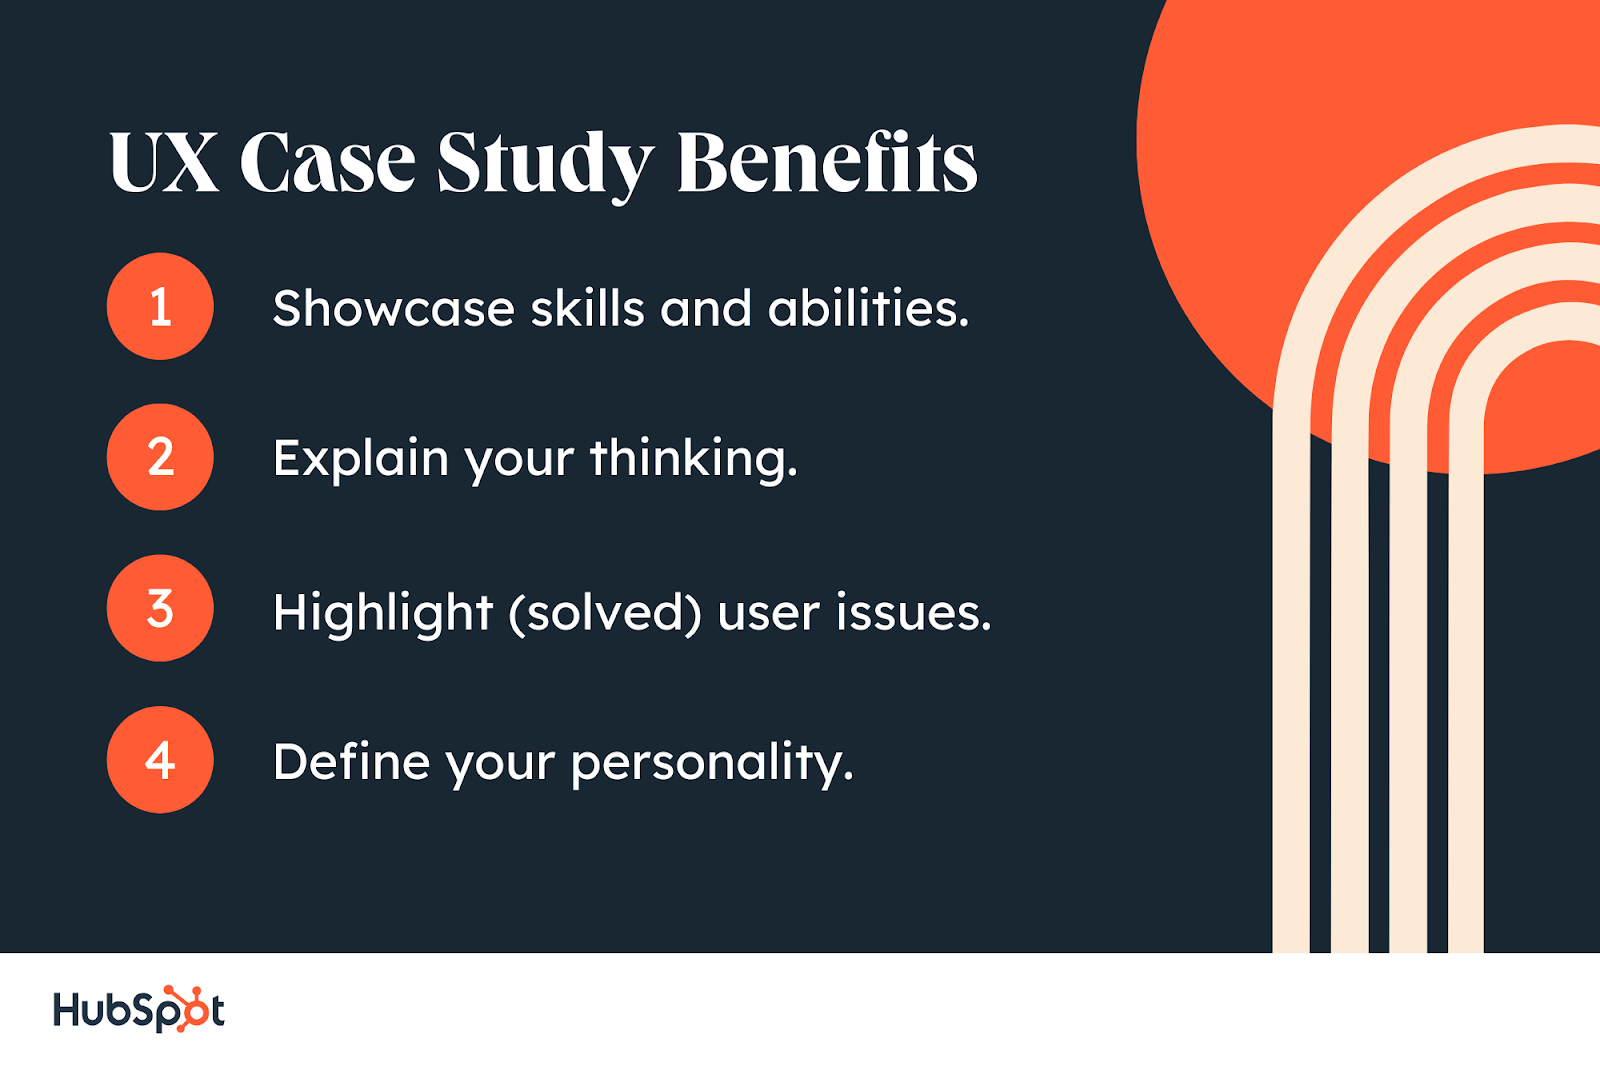 UX Case Study Benefits Showcase skills and abilities. Explain your thinking. Highlight (solved) user issues. Define your personality.